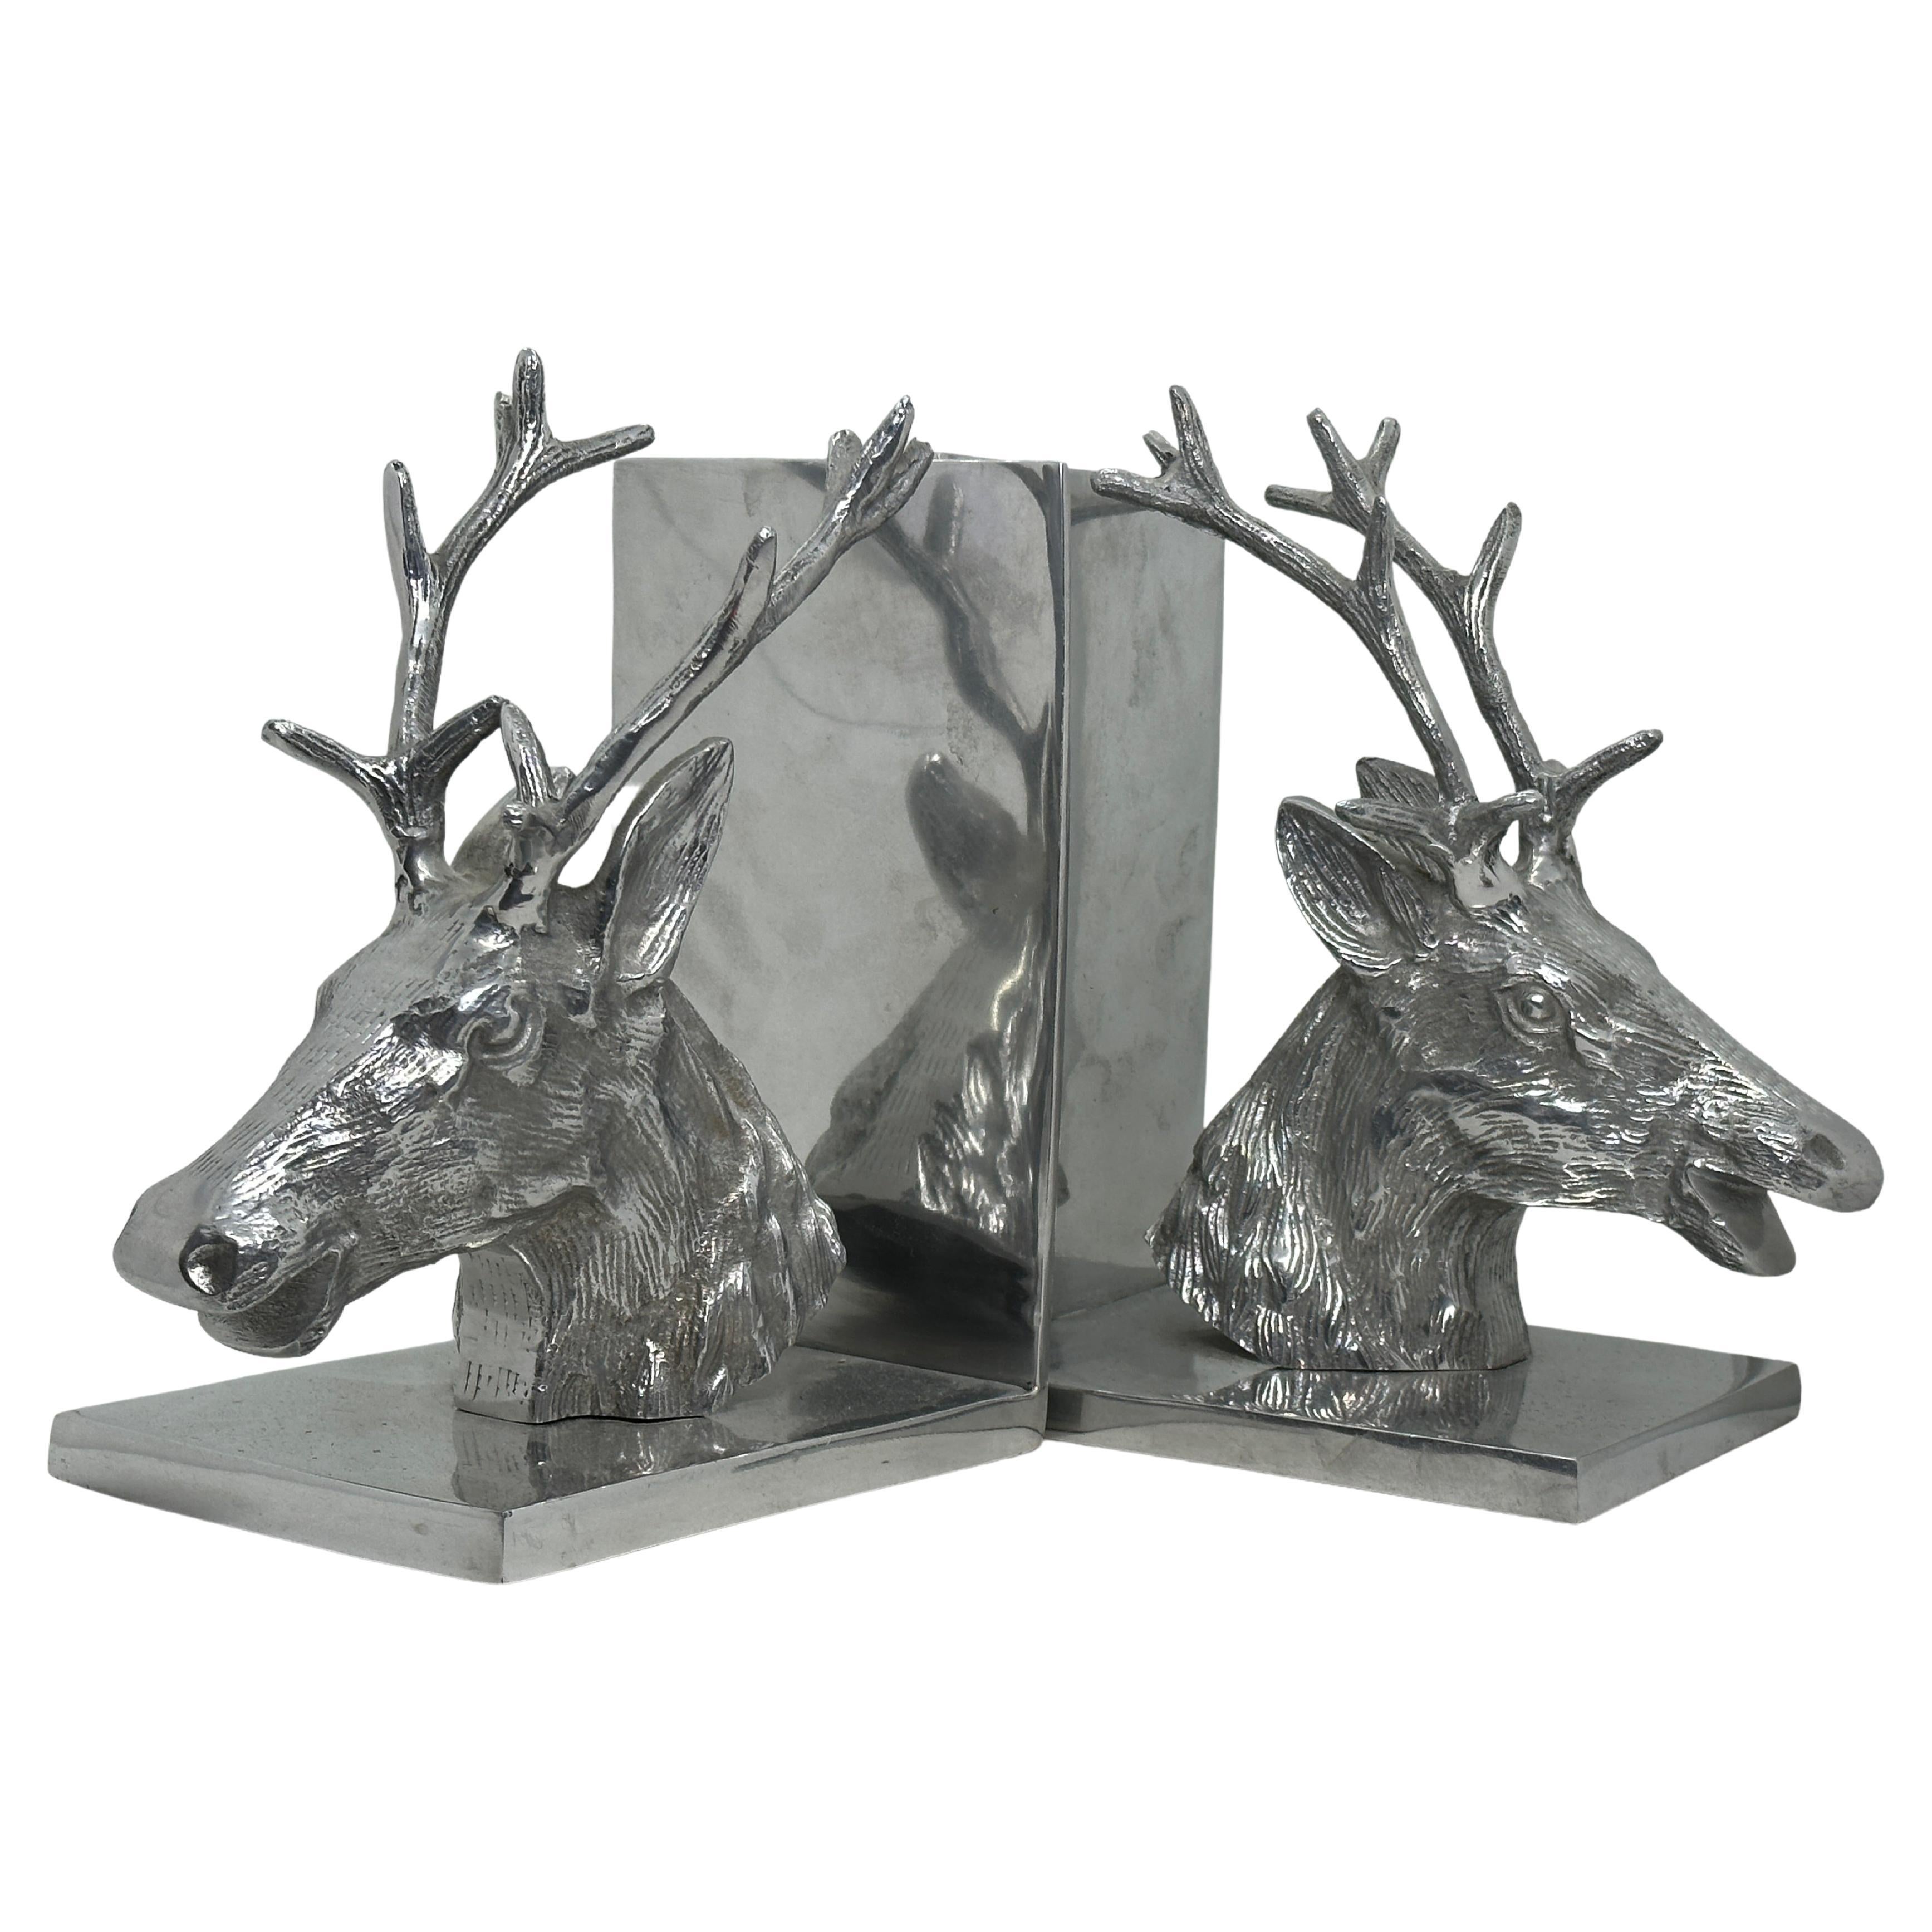 Pair of Vintage Polished Aluminum Deer Bookends, circa 1980s